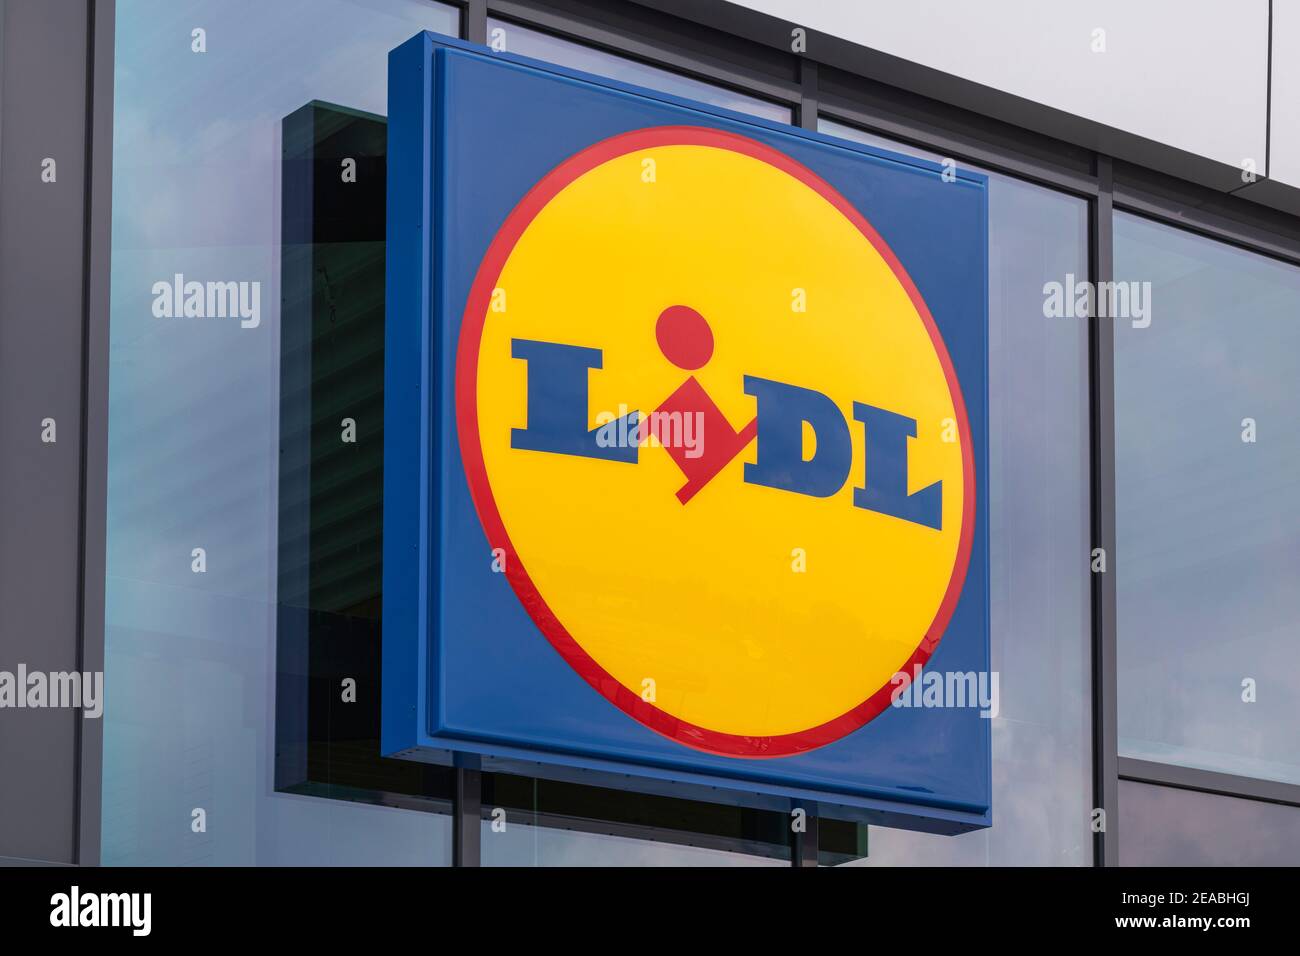 LIDL owns many brands with different logos, some of them with symbolism